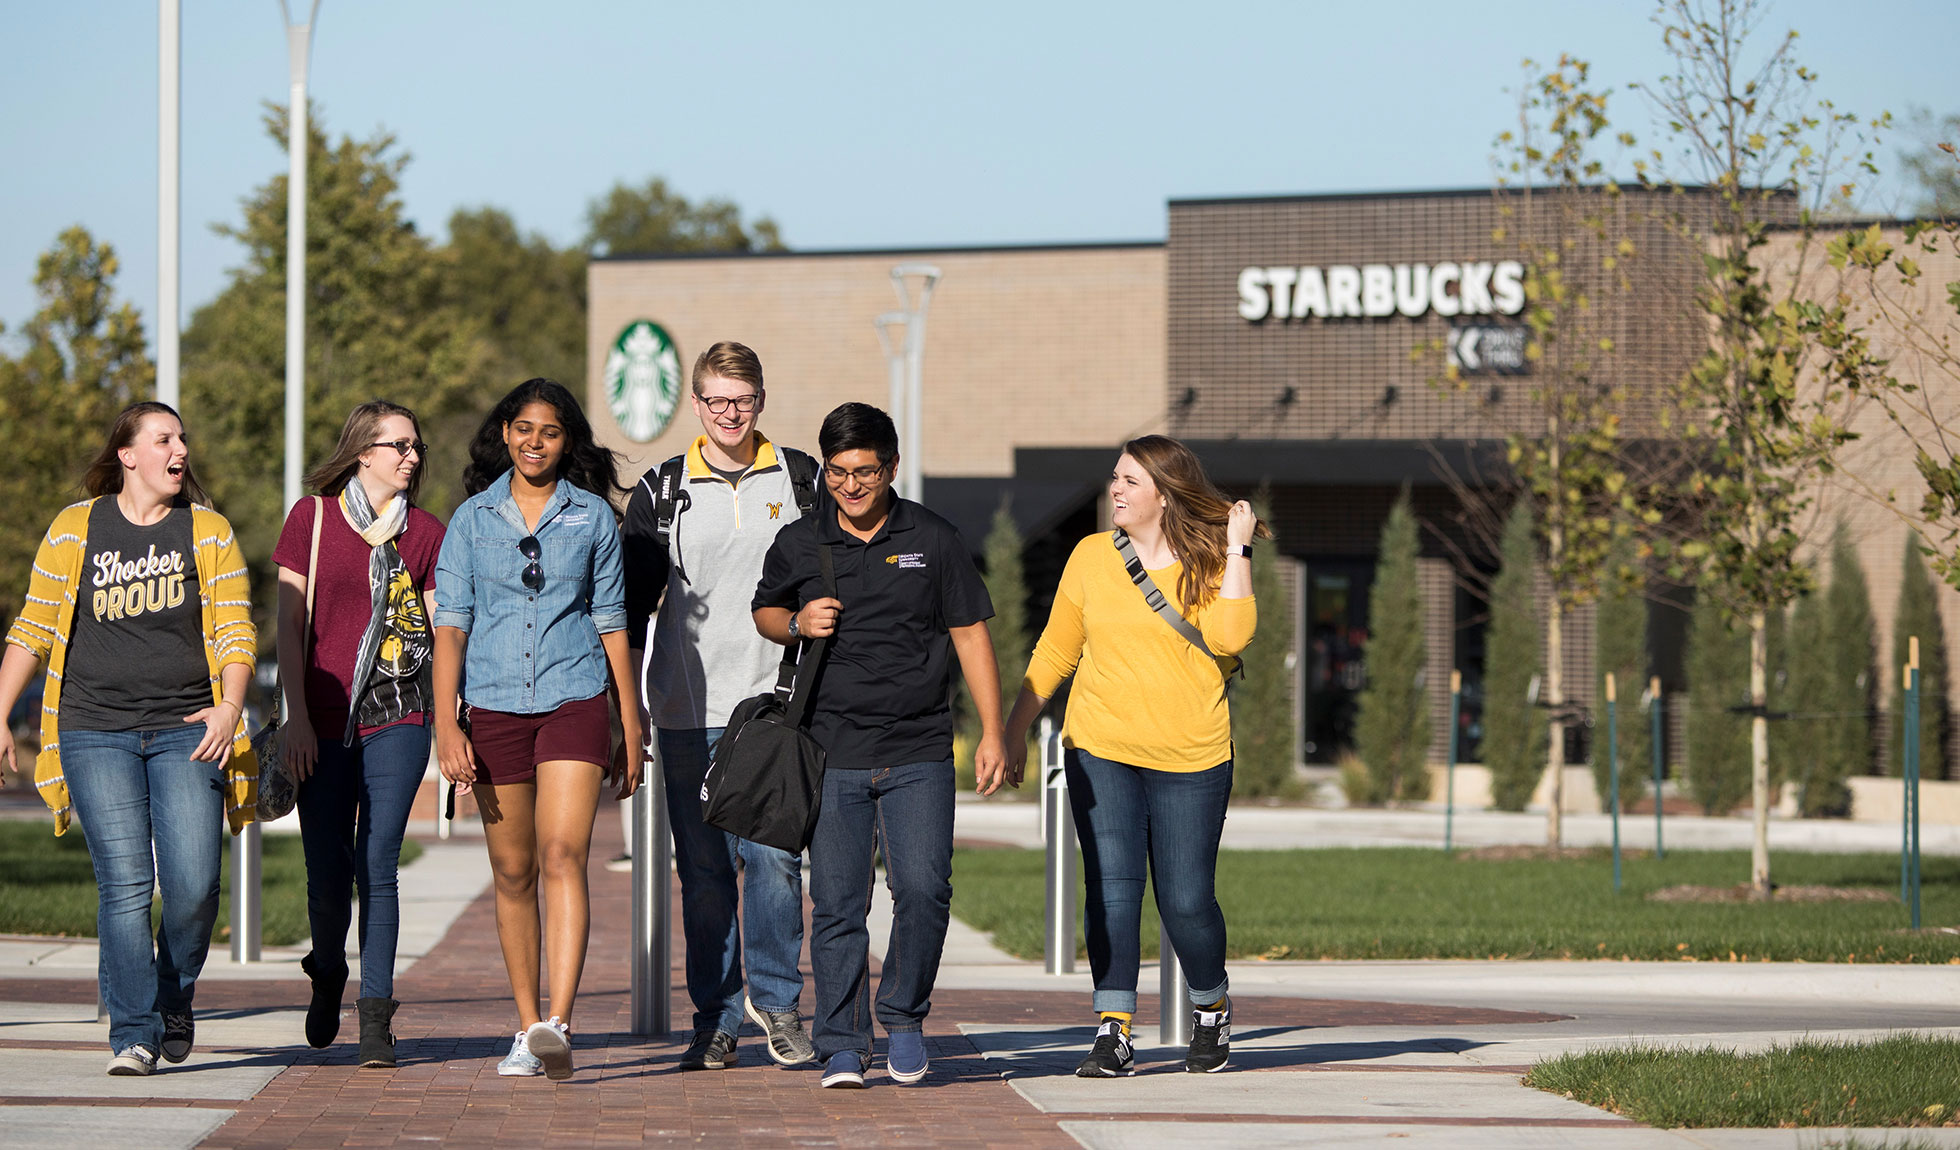 Group of Students Walking Together